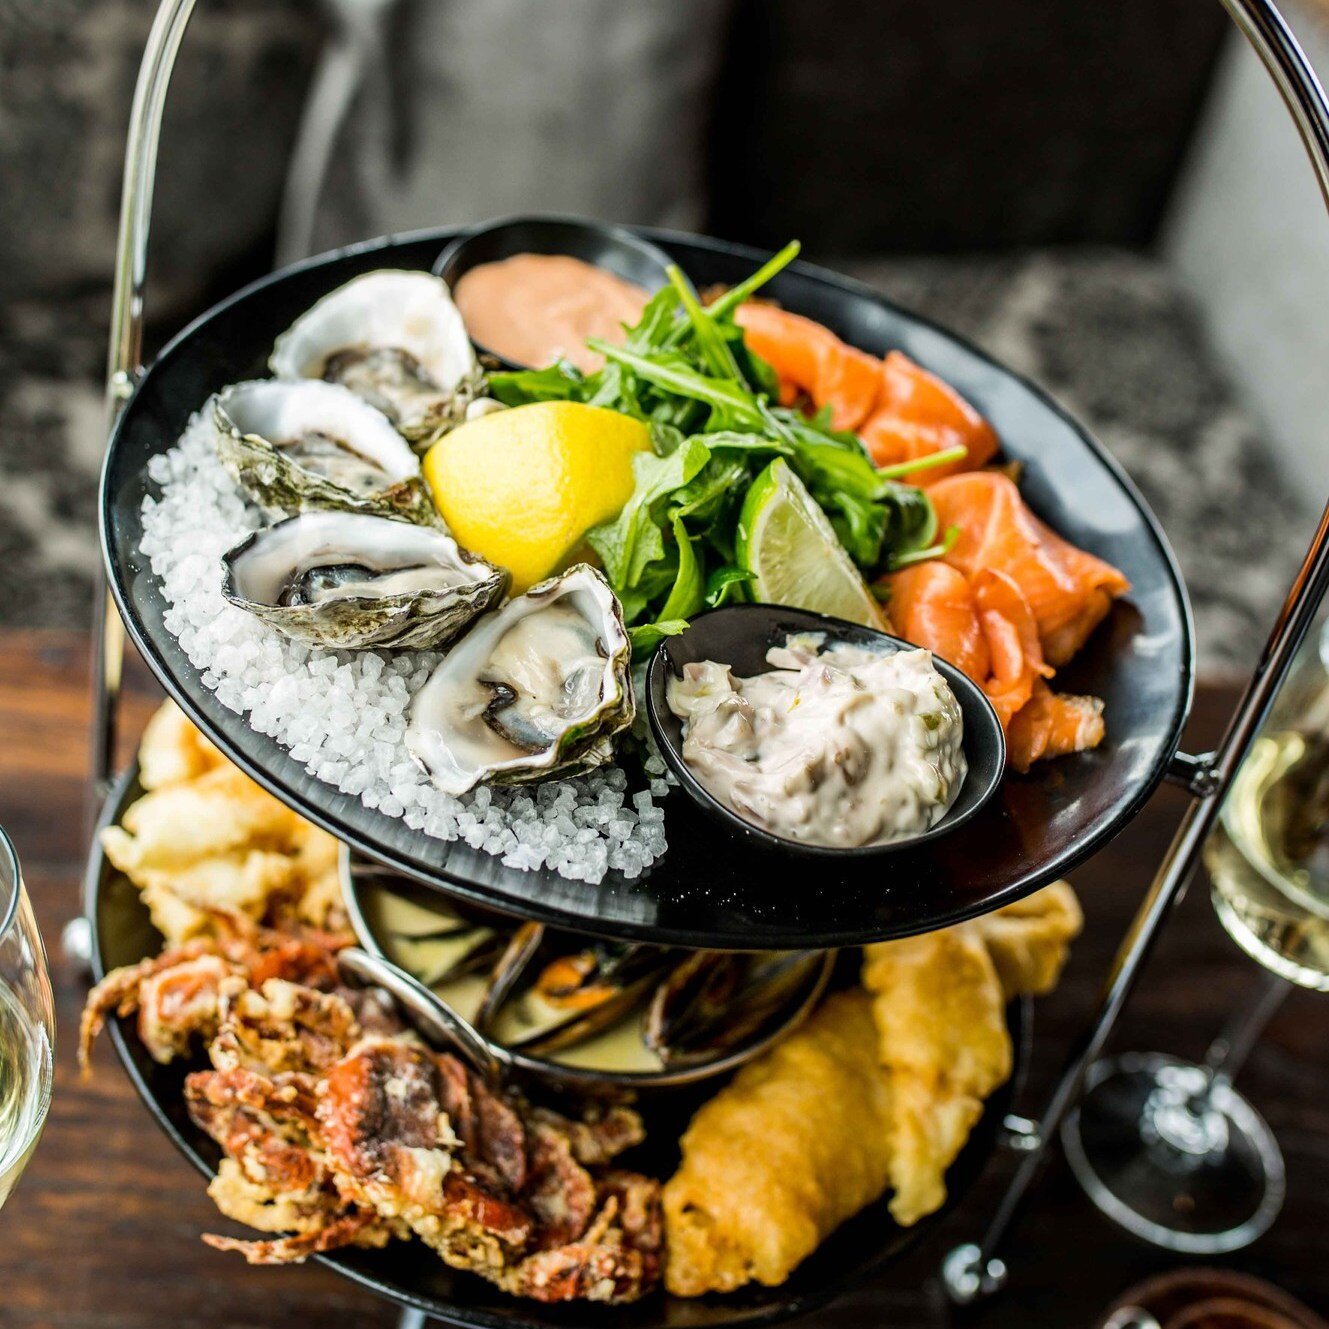 Indulge in a delectable Good Friday lunch with our  Seafood Platter for 2! 🌊 🦪

Reserve your table now 👉 bit.ly/BookBoatshed

Please note, we will be closed for dinner Good Friday.

#GoodFriday #SeafoodFeast #seafoodlunch #ballaratsbestseafood